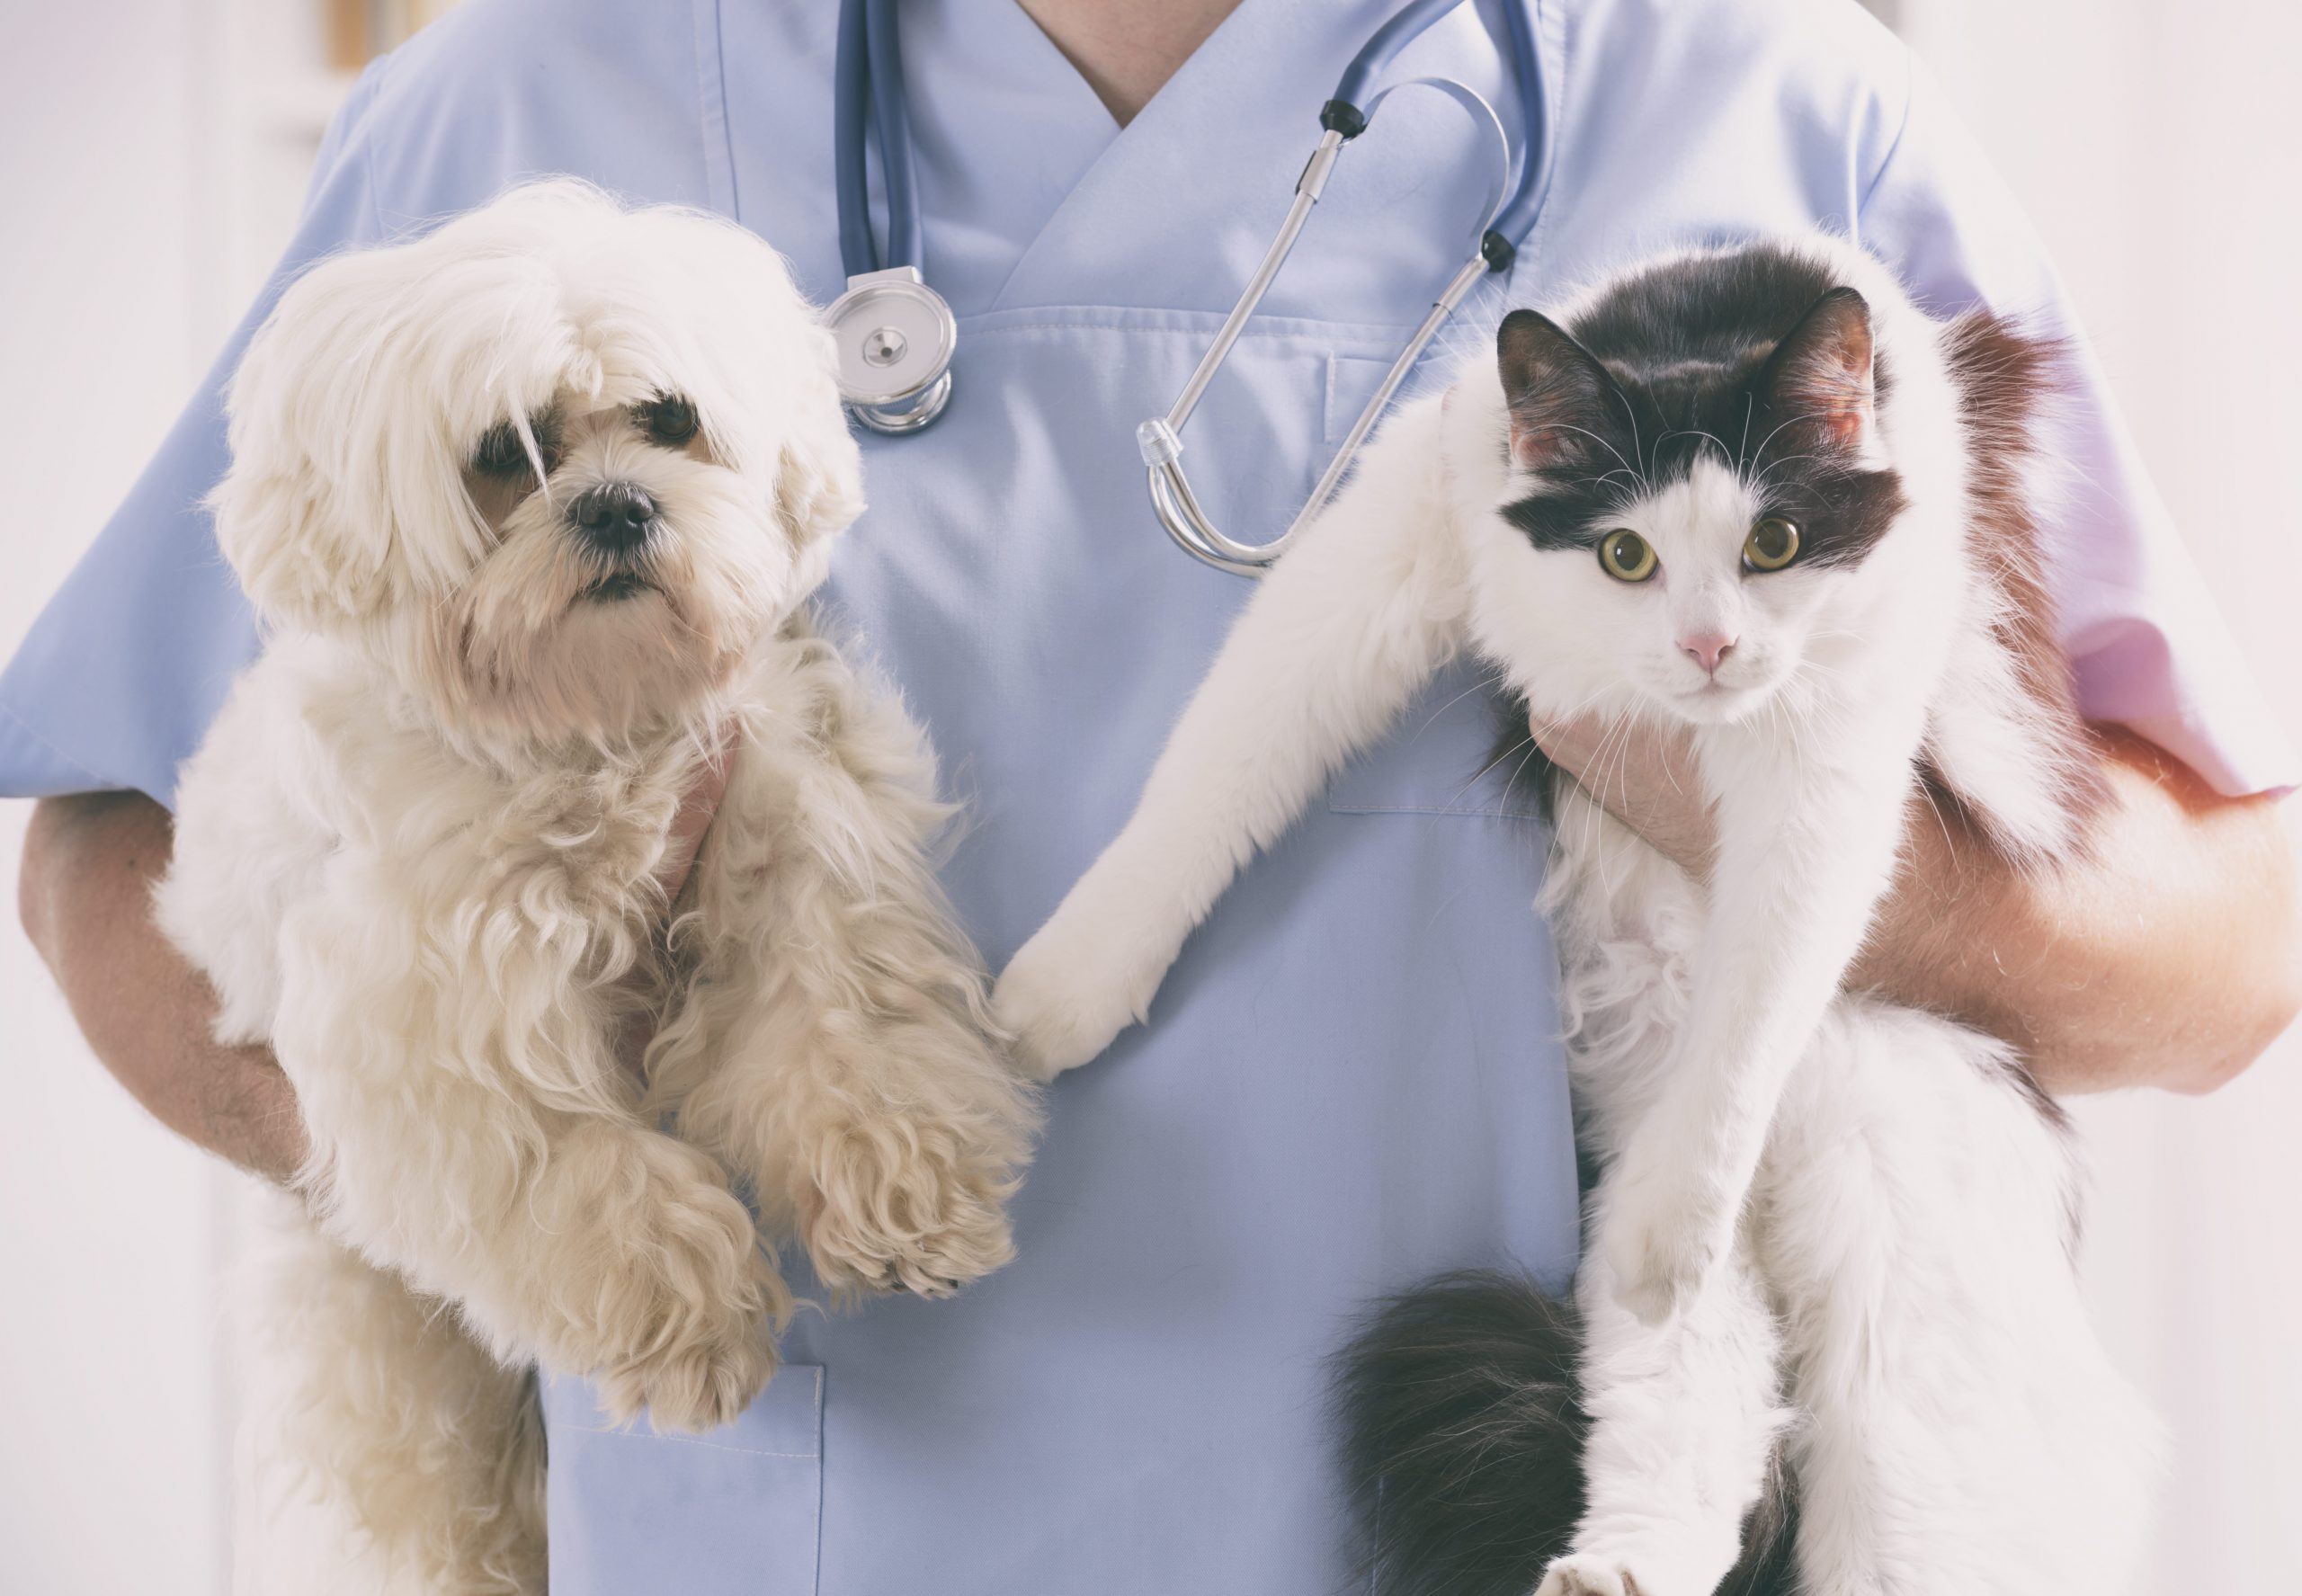 Signs You Need to Switch Veterinarians | Reader's Digest